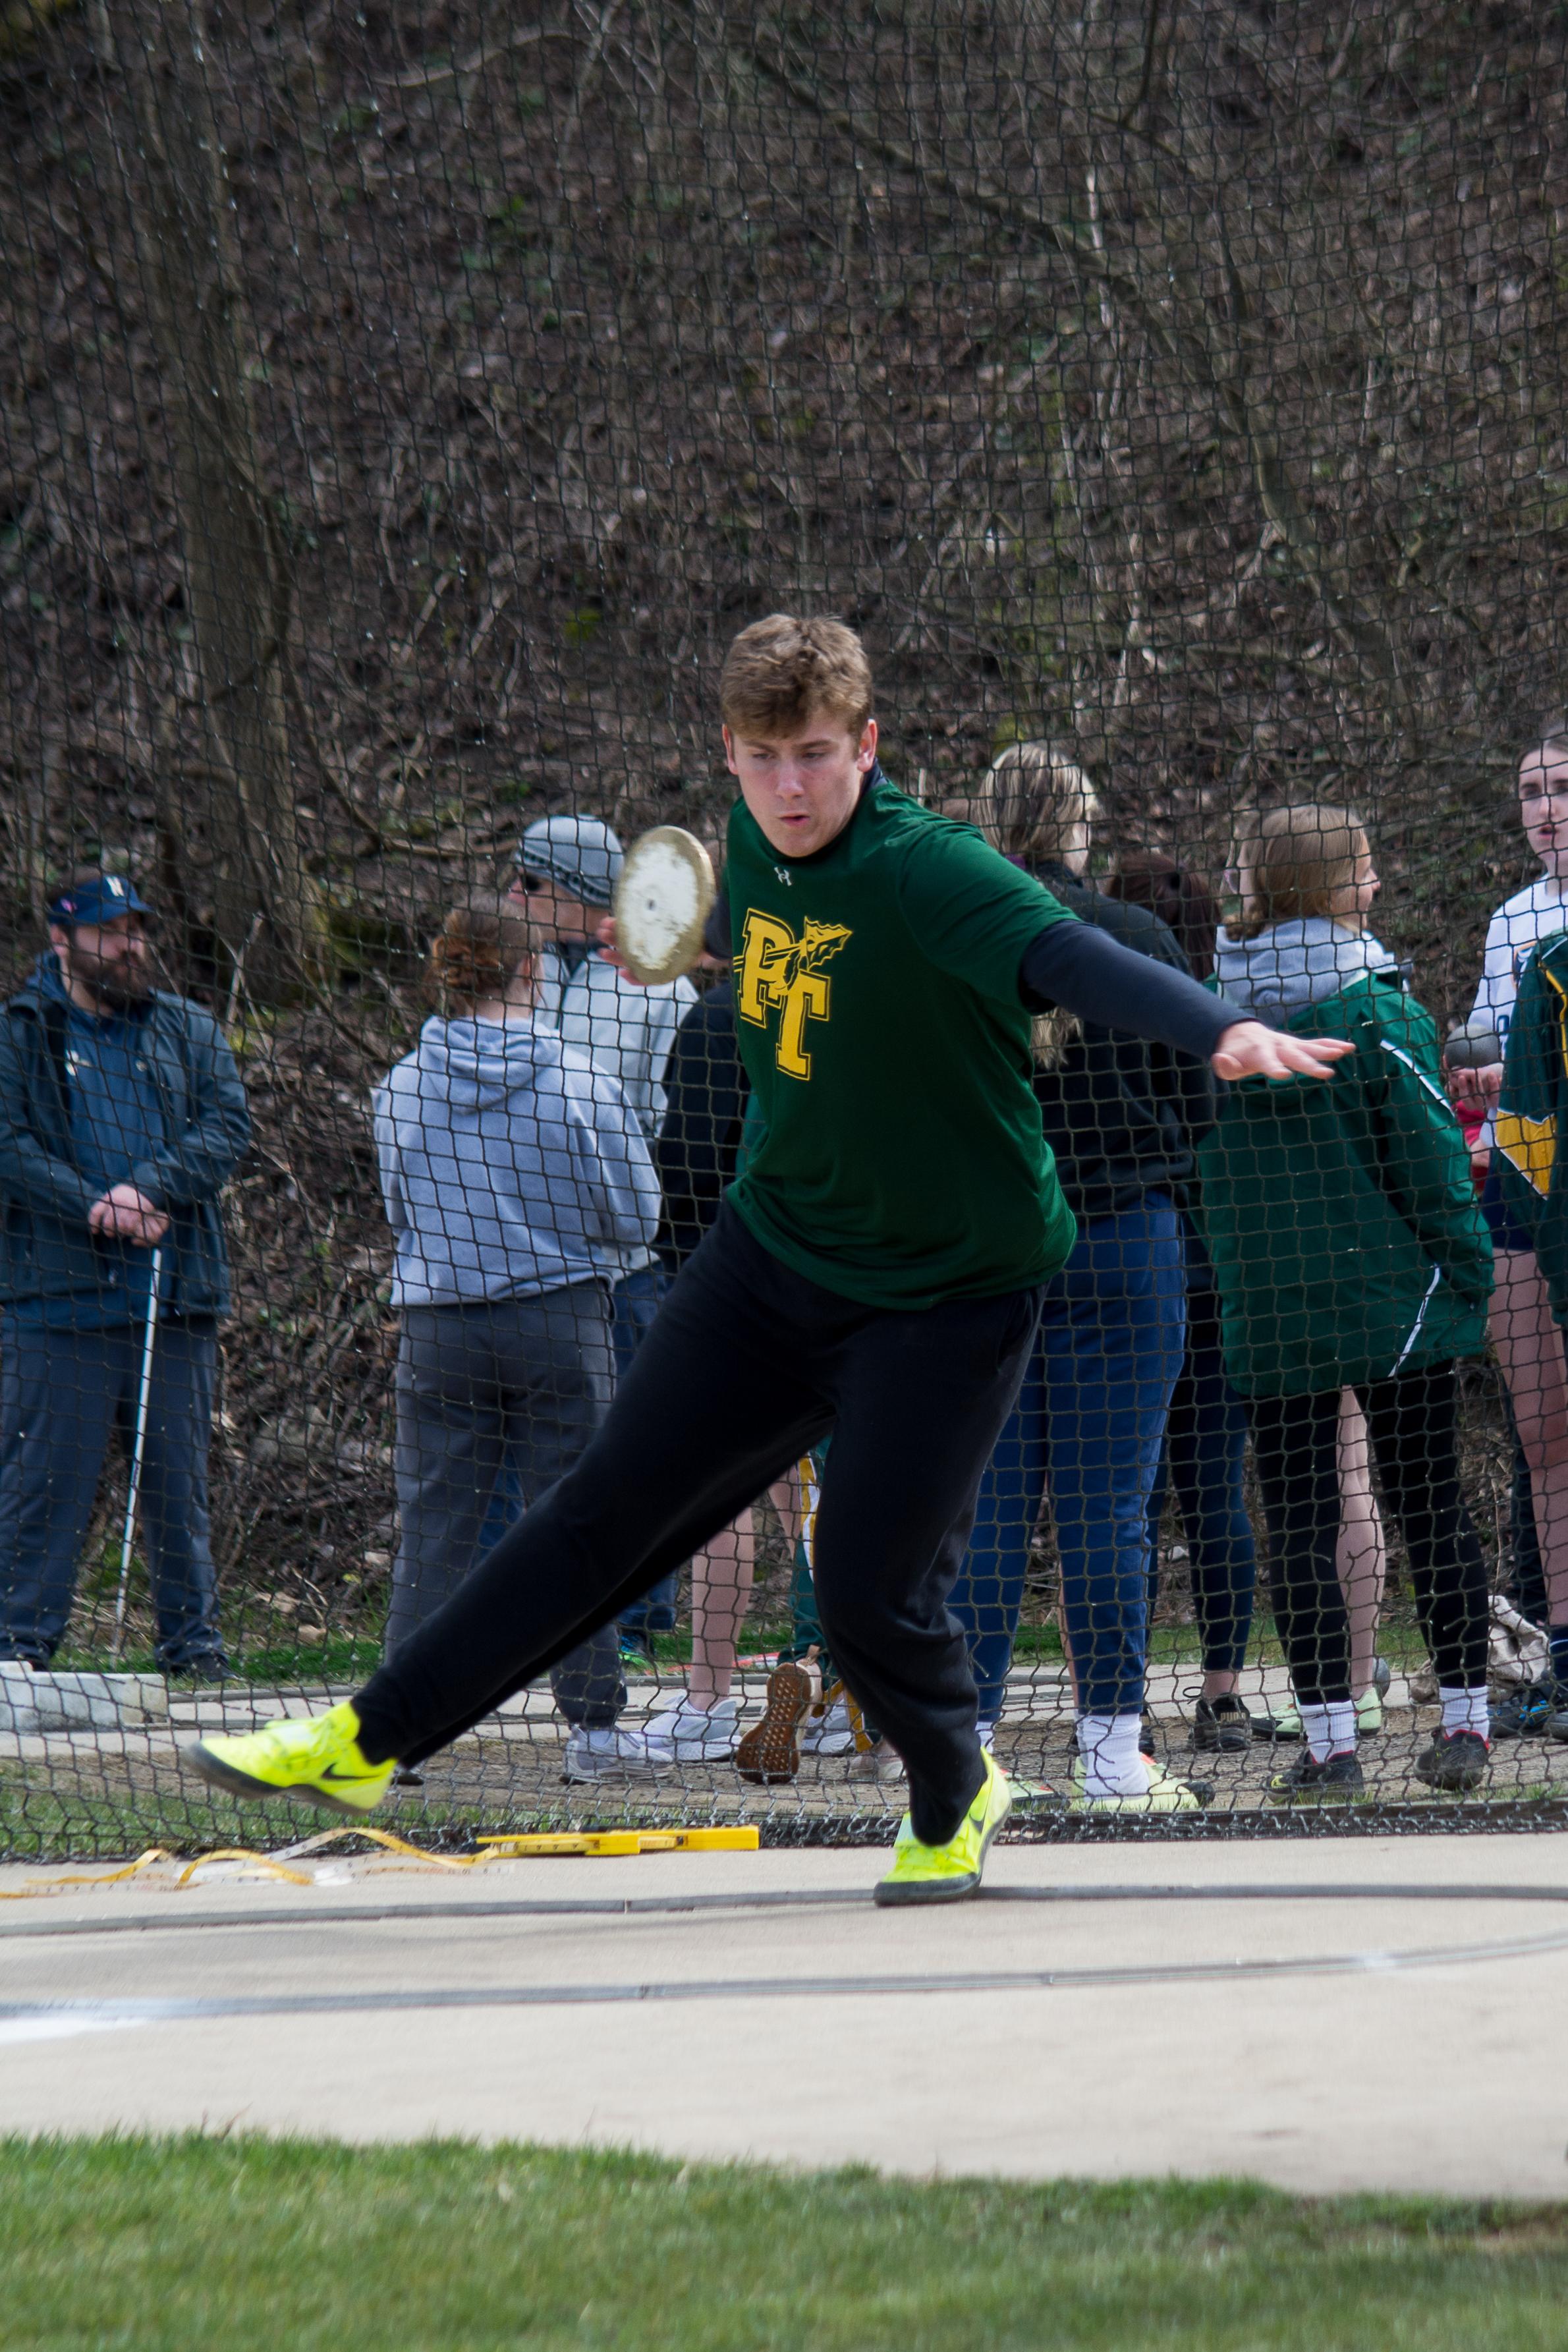 Matthew competes in the discus